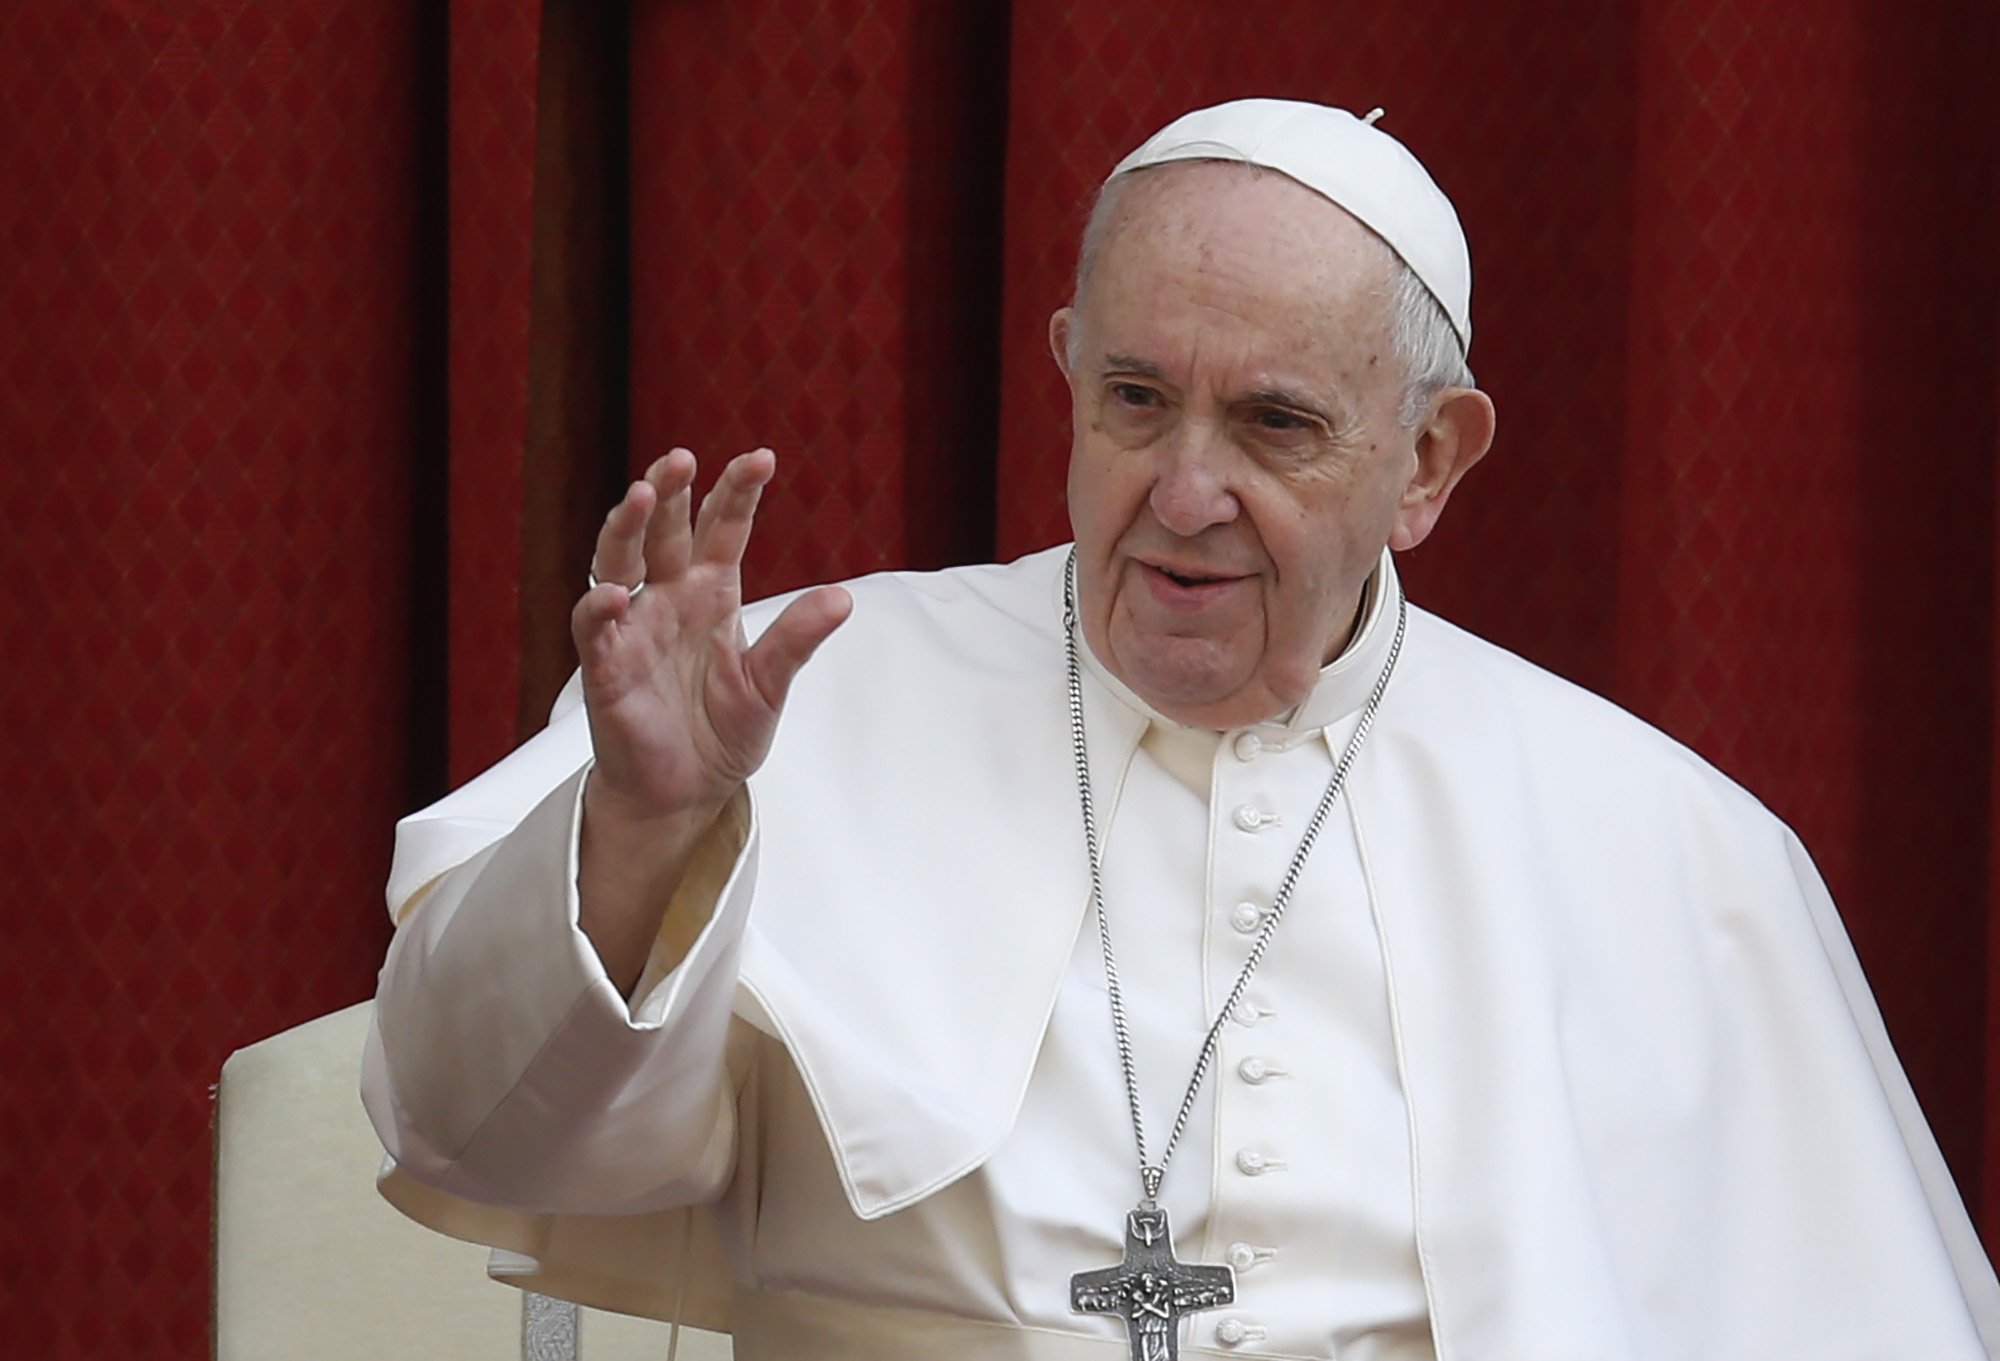 Why did Pope Francis Get Hospitalized? Here's his Latest Health Update